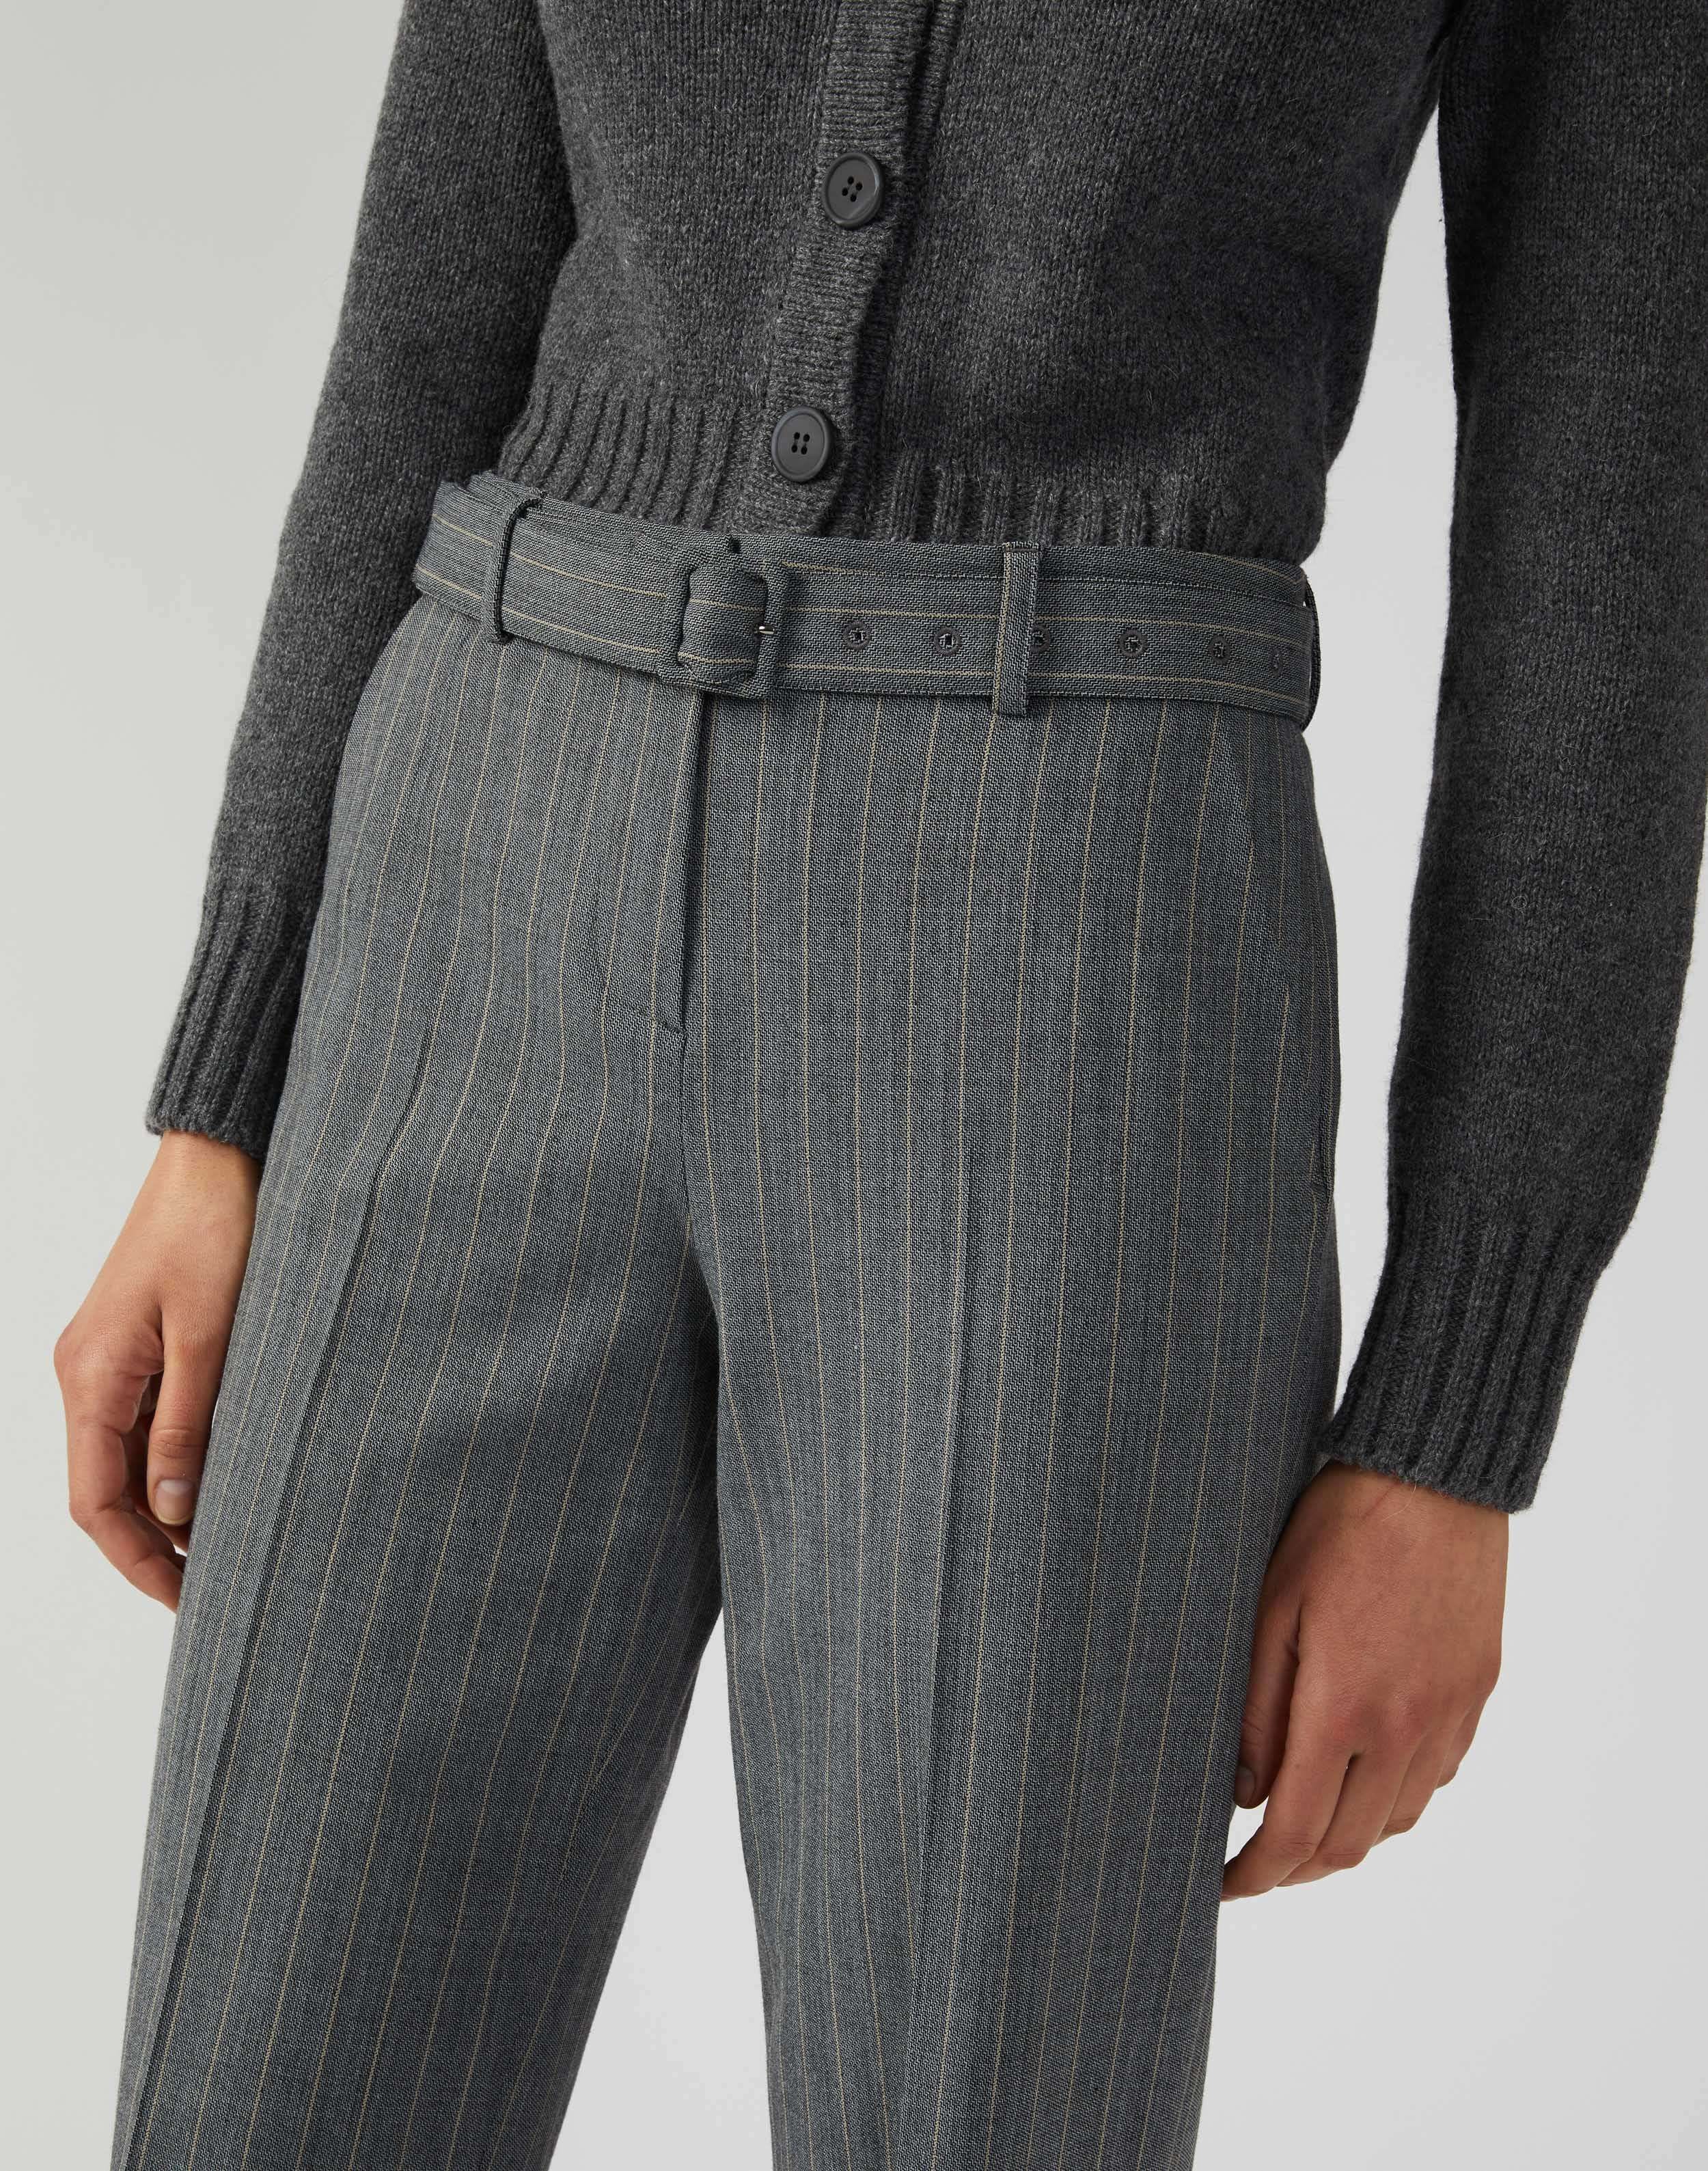 Classic-looking pinstripe trousers